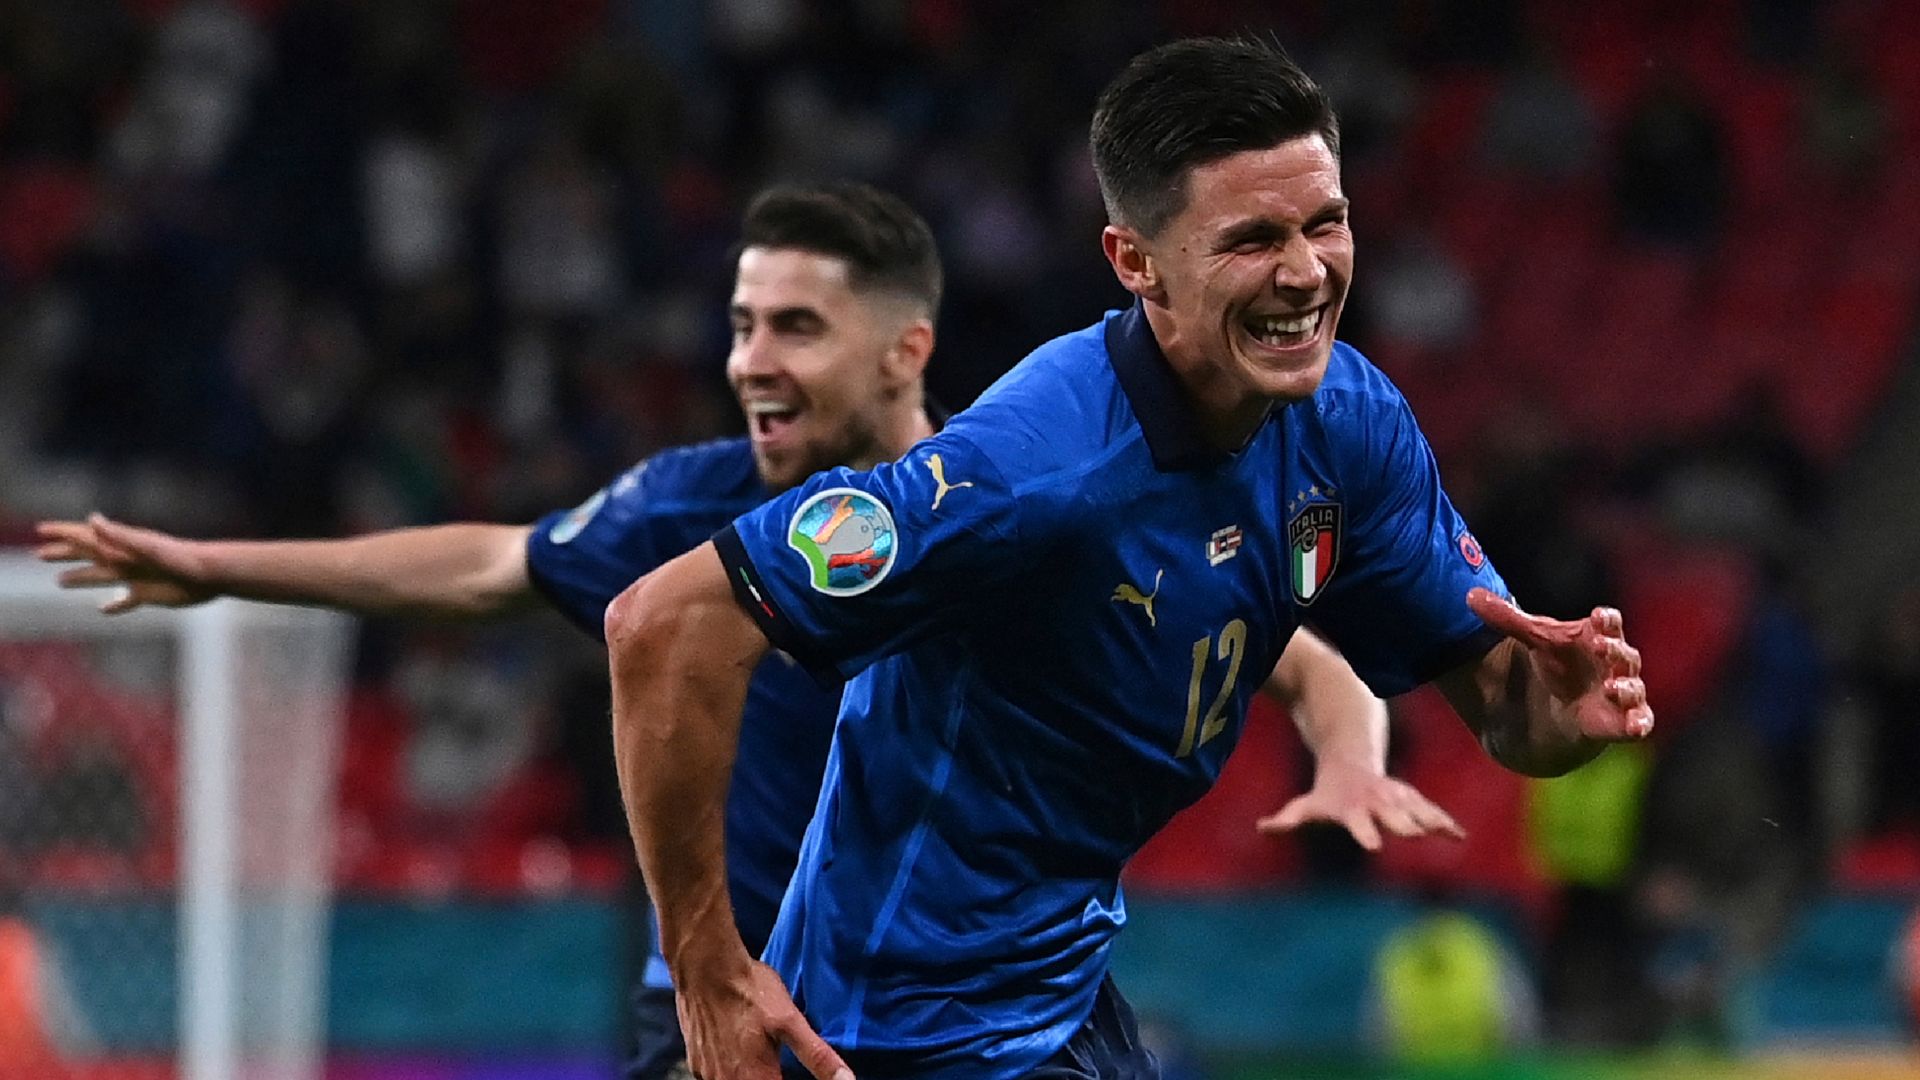 Italy beat Austria in extra-time to reach quarter-finals